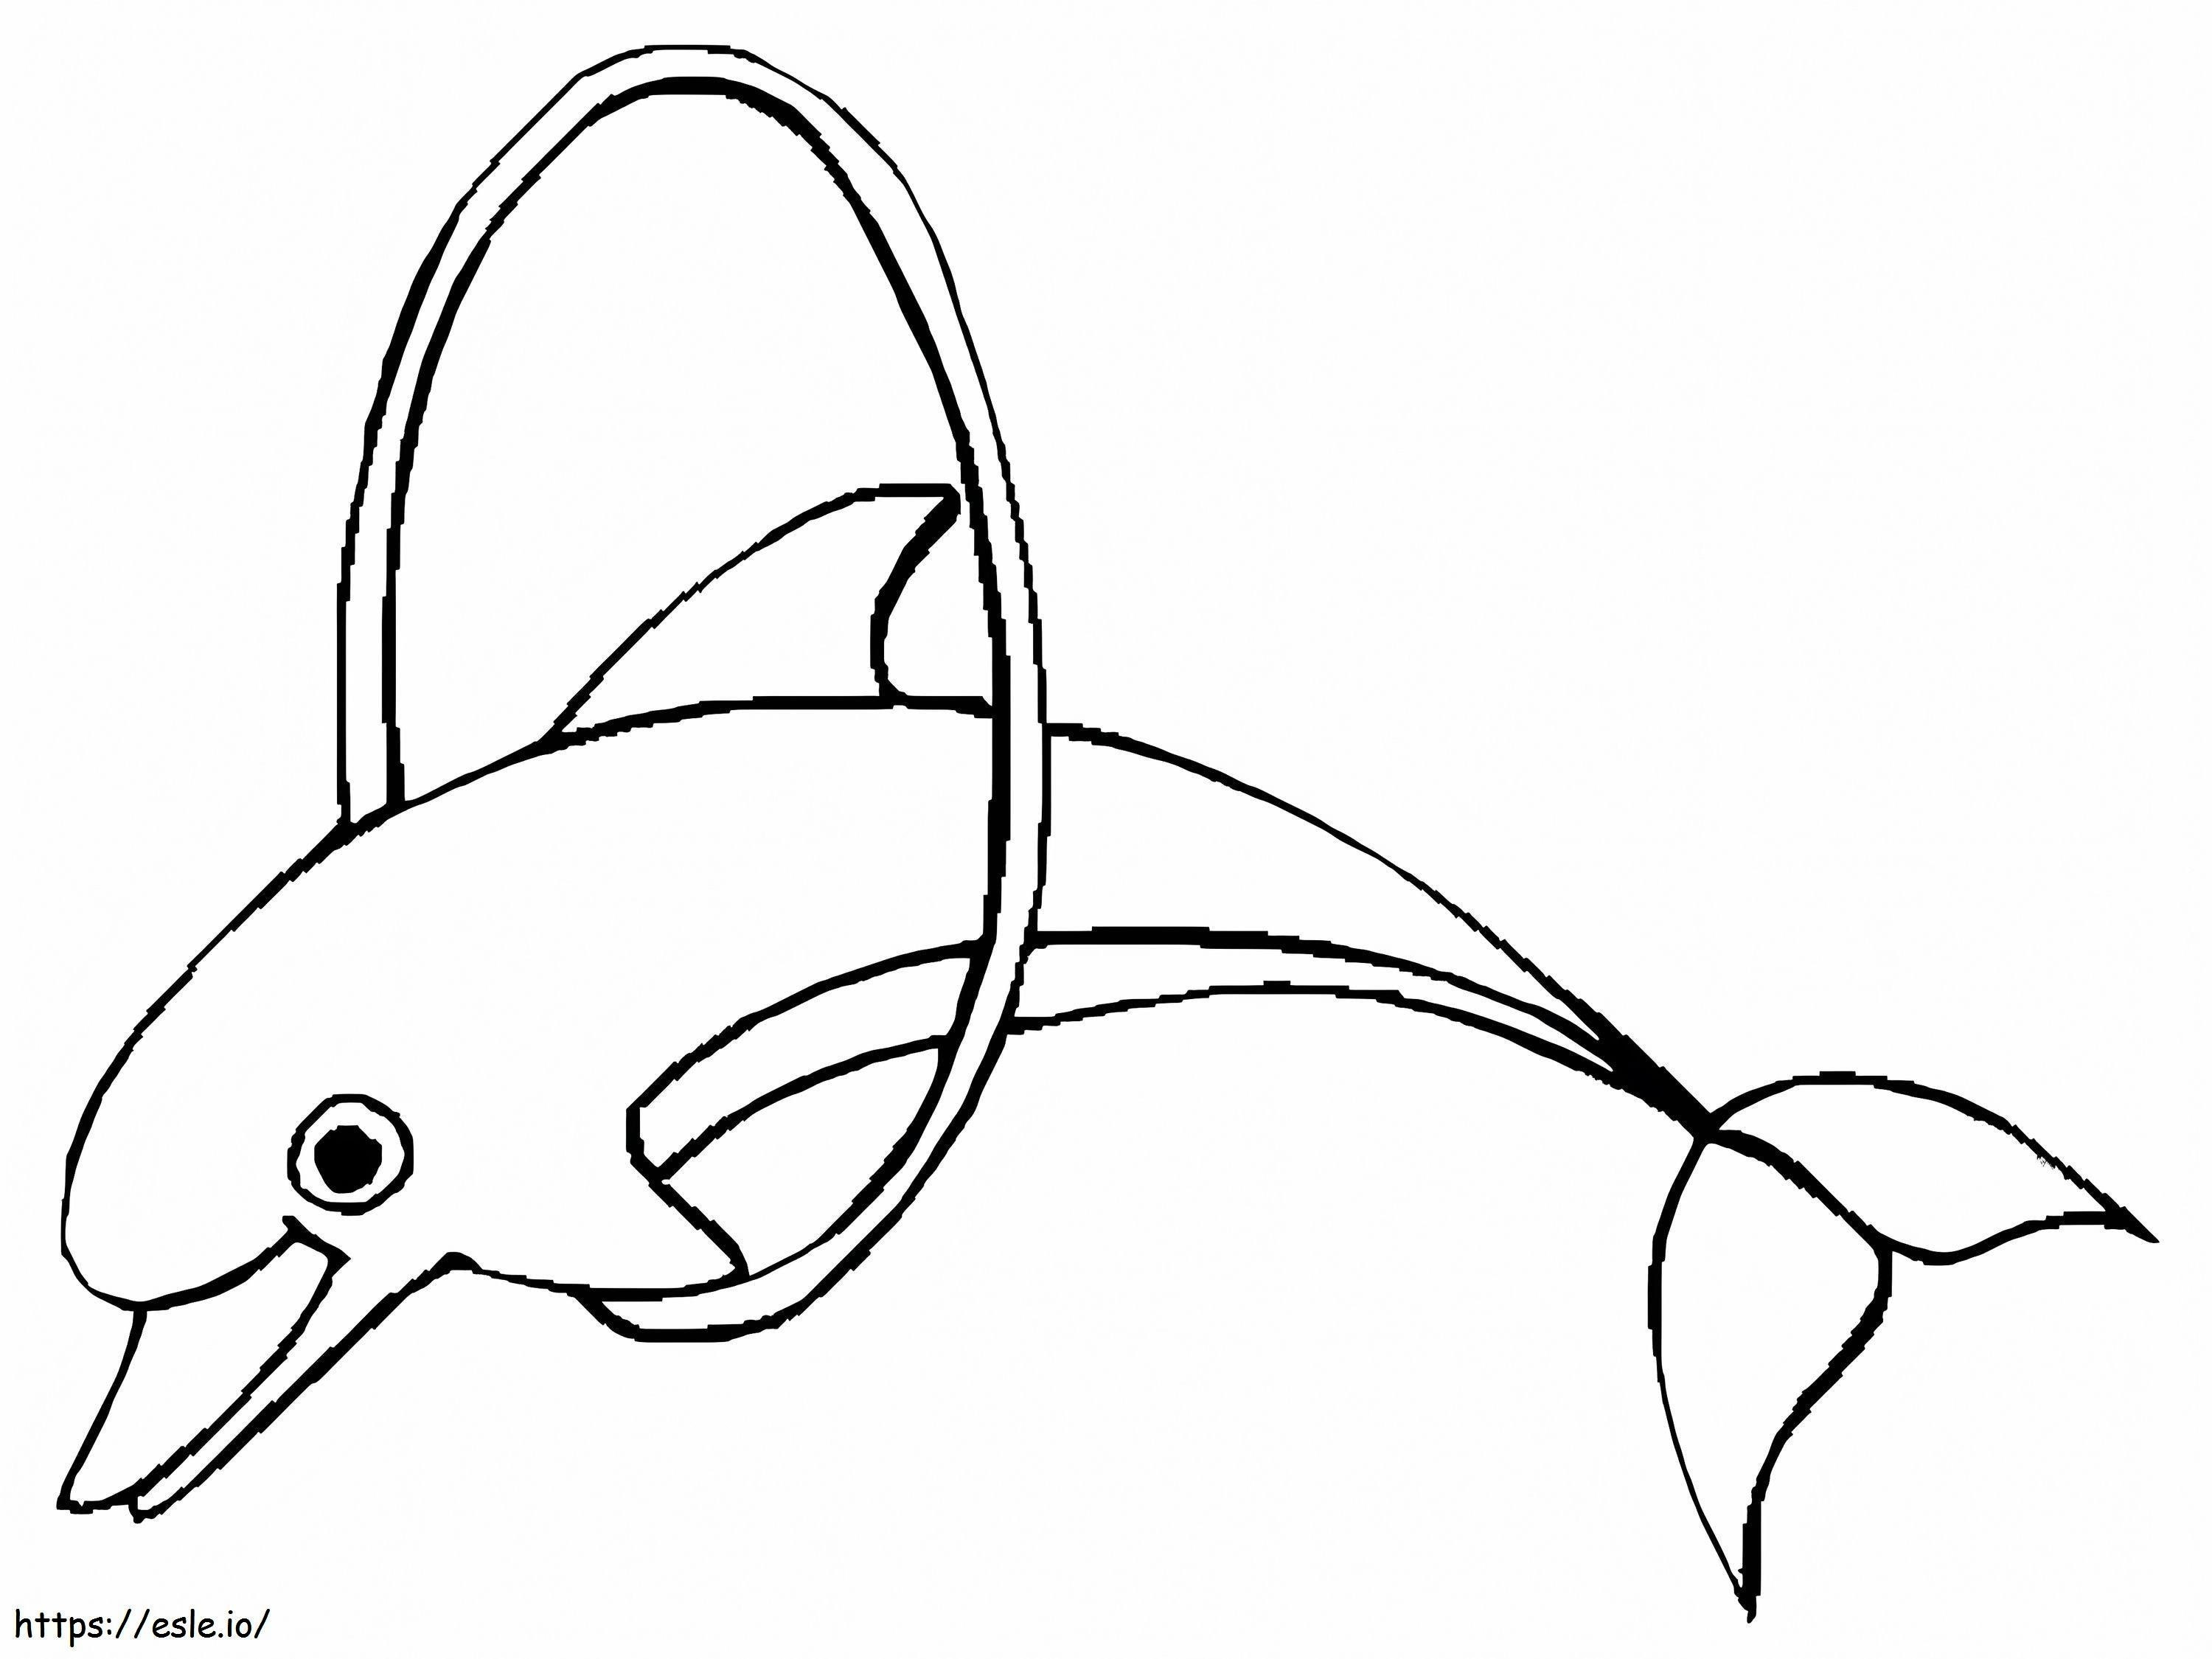 A Dolphin coloring page